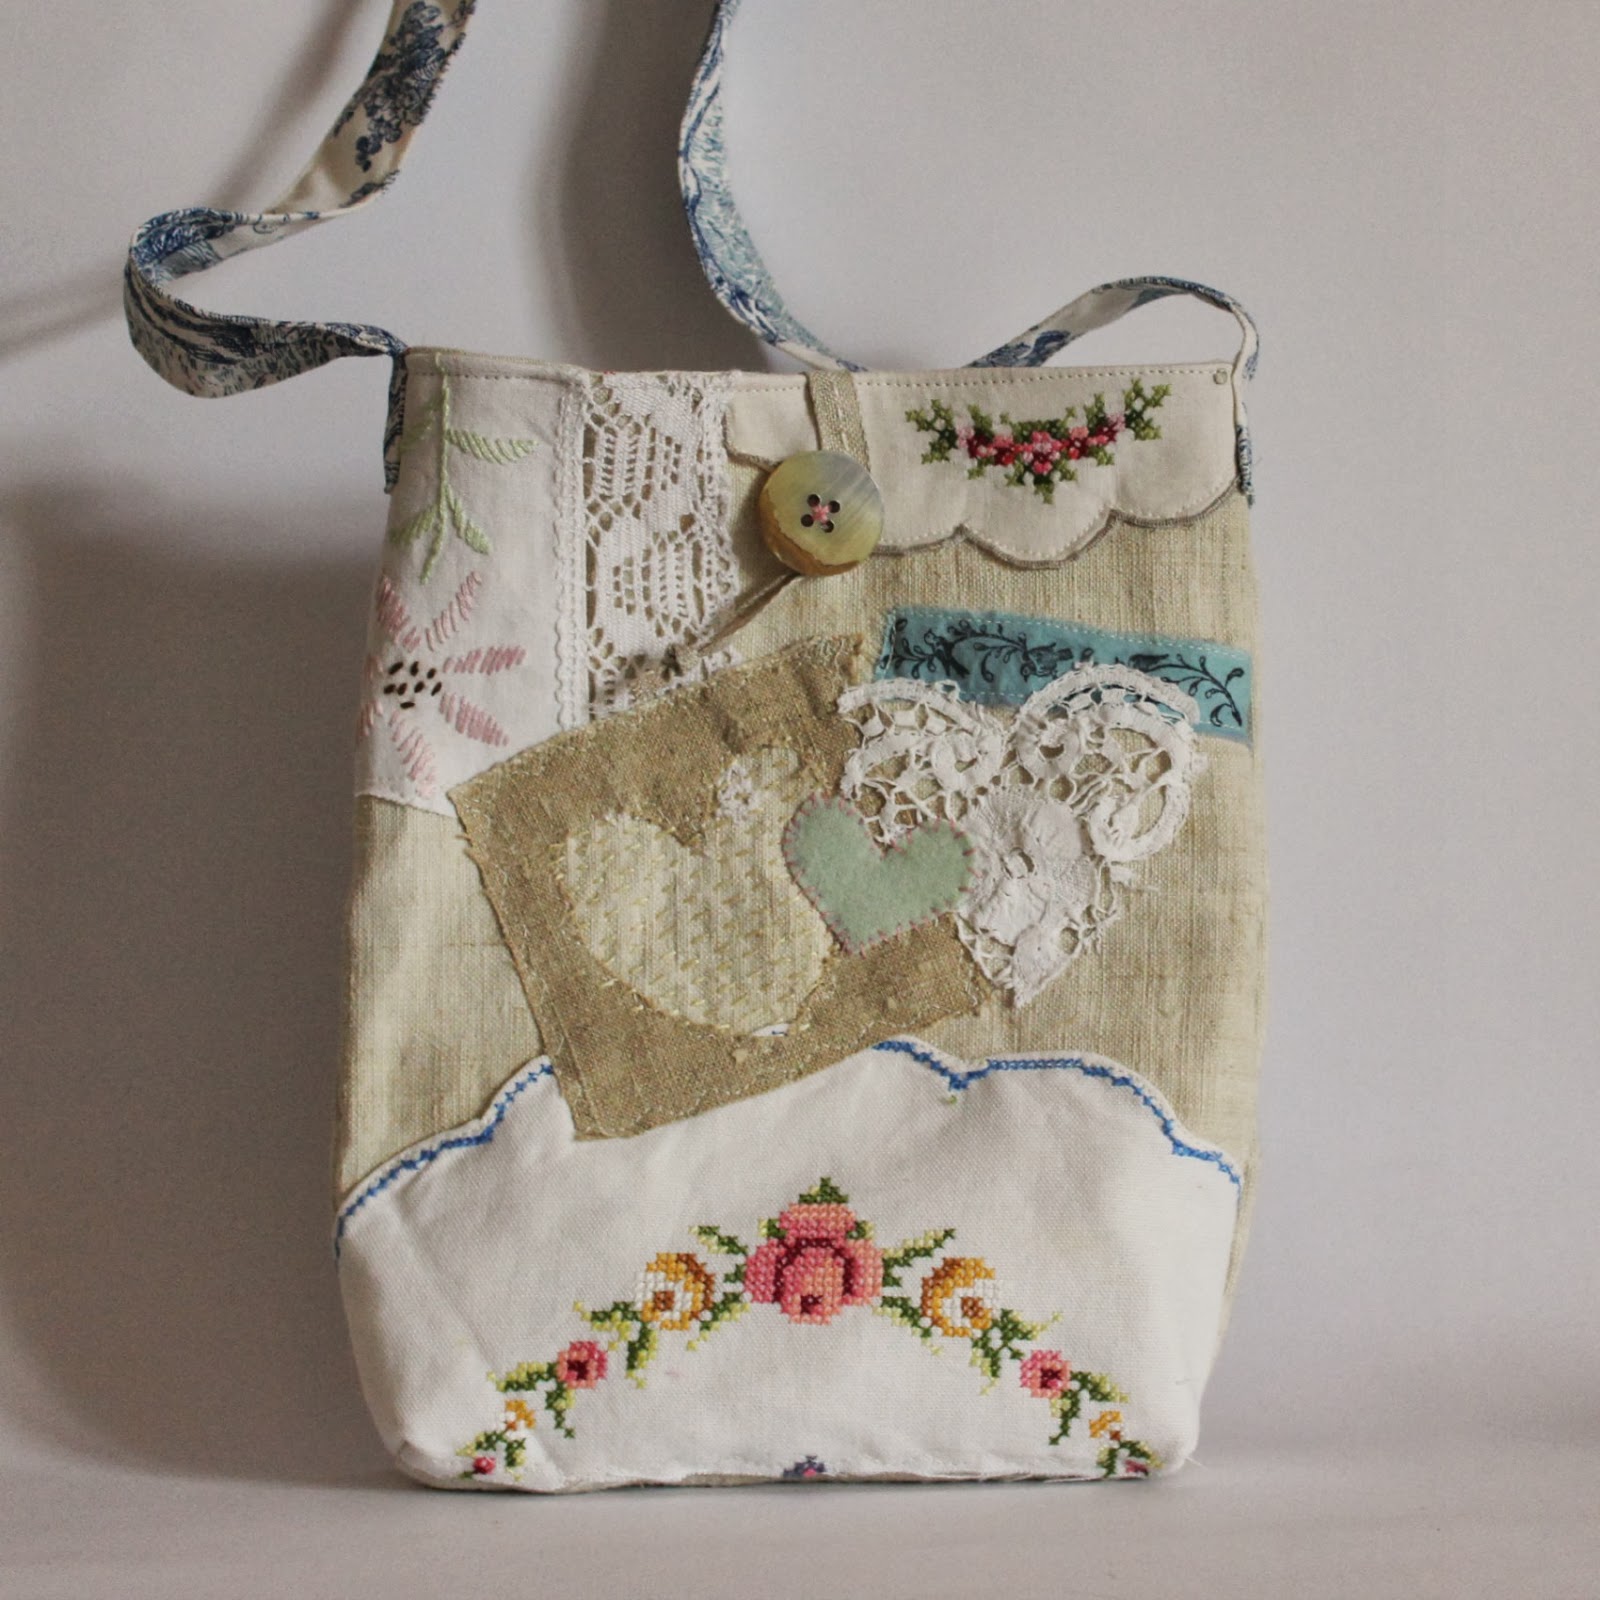 Roxy Creations: Vintage embroidery bags